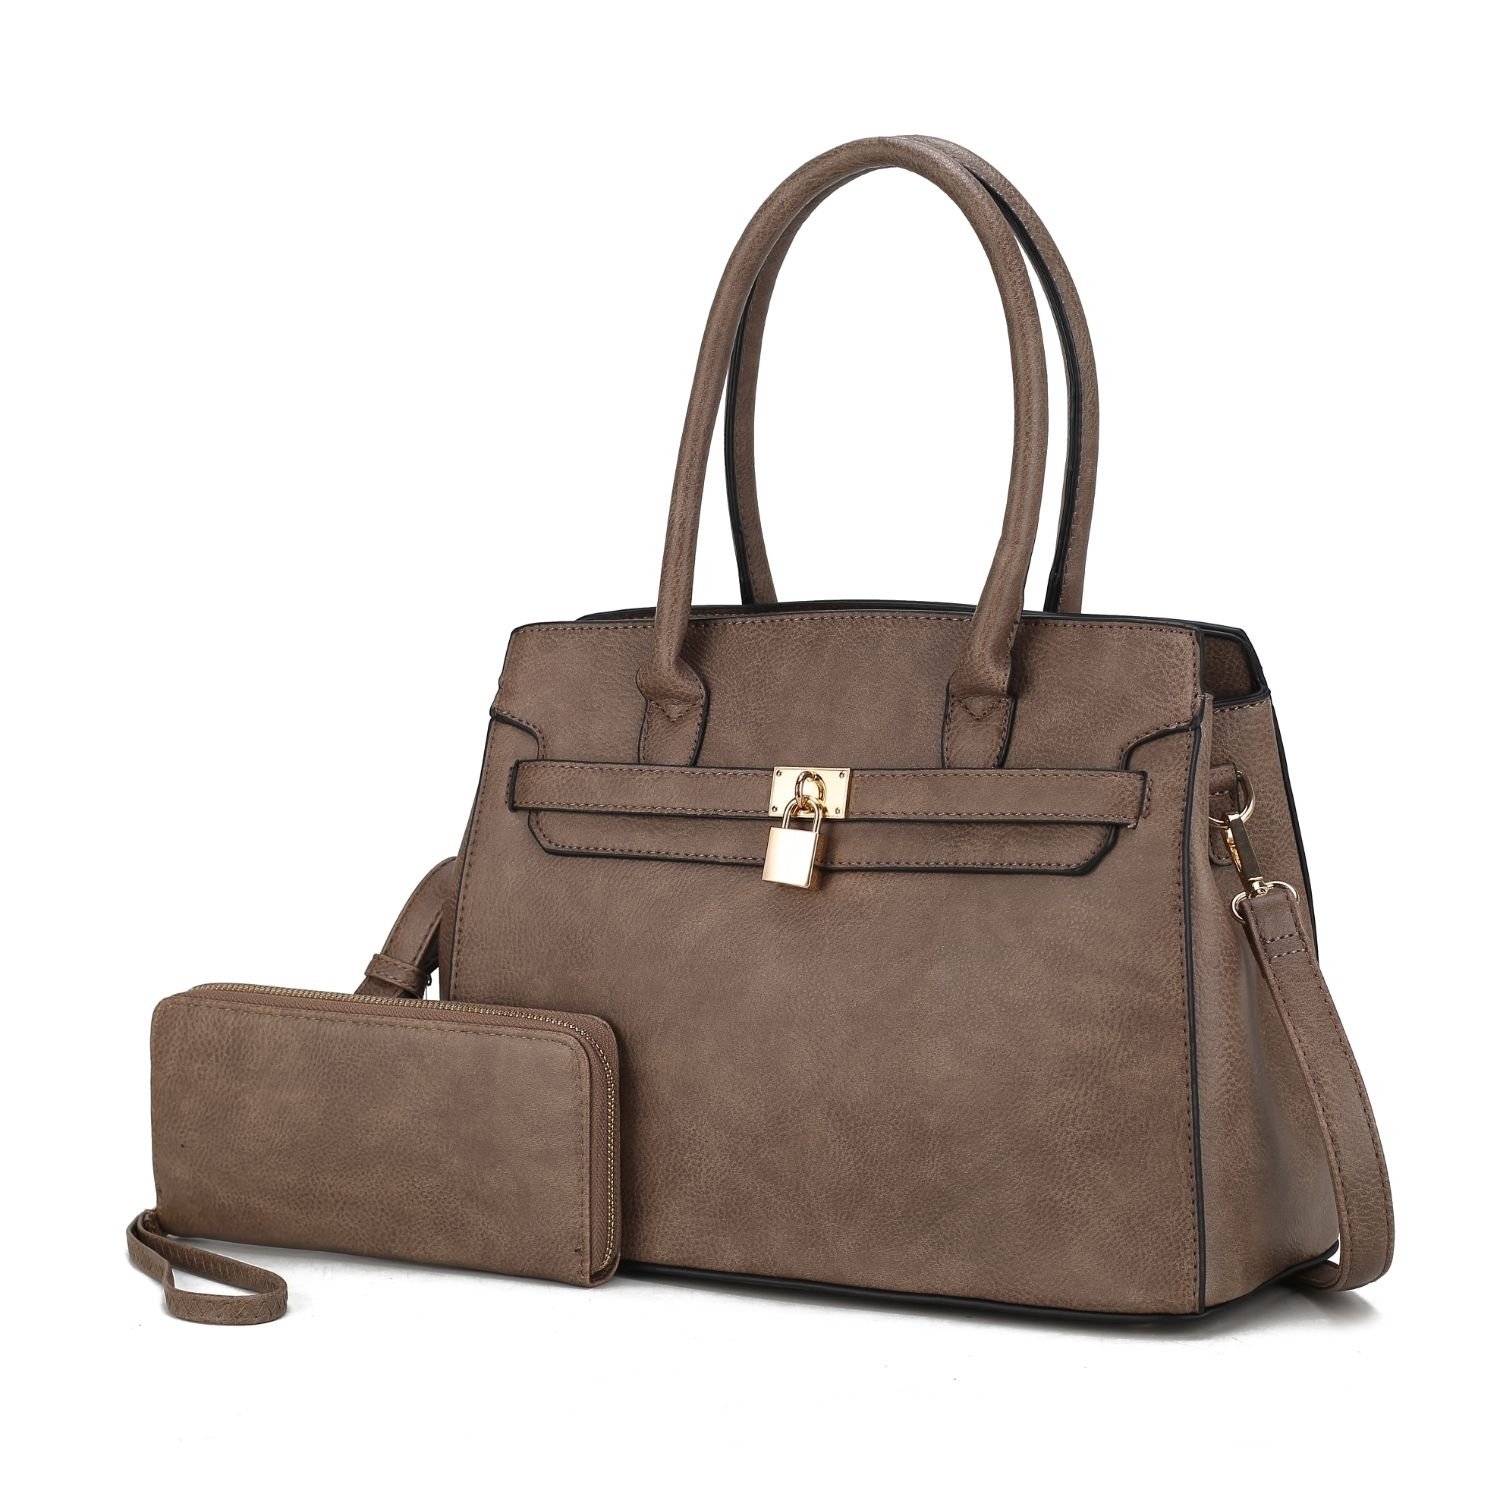 MKF Collection Bruna Satchel Handbag With A Matching Wallet By Mia K -2 Pieces Set - Stone